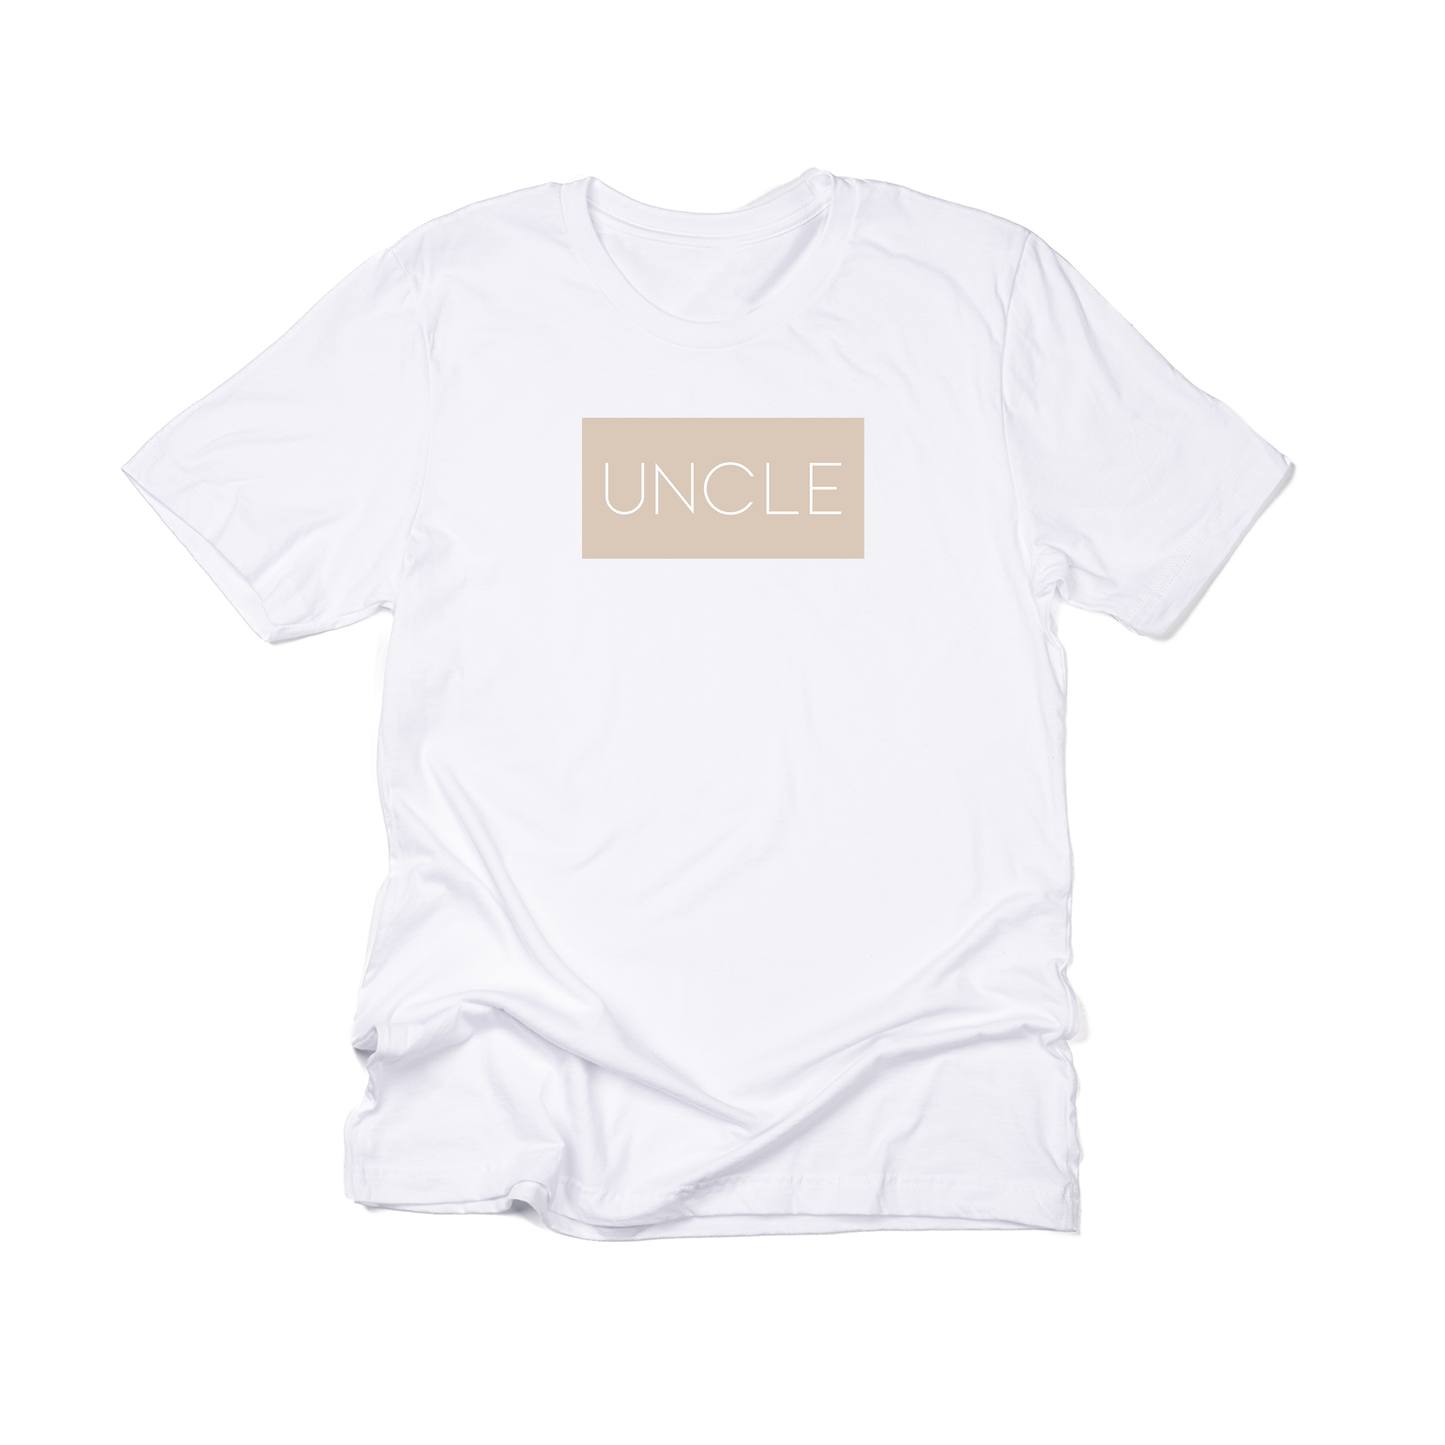 Uncle (Boxed Collection, Stone Box/White Text, Across Front) - Tee (White)